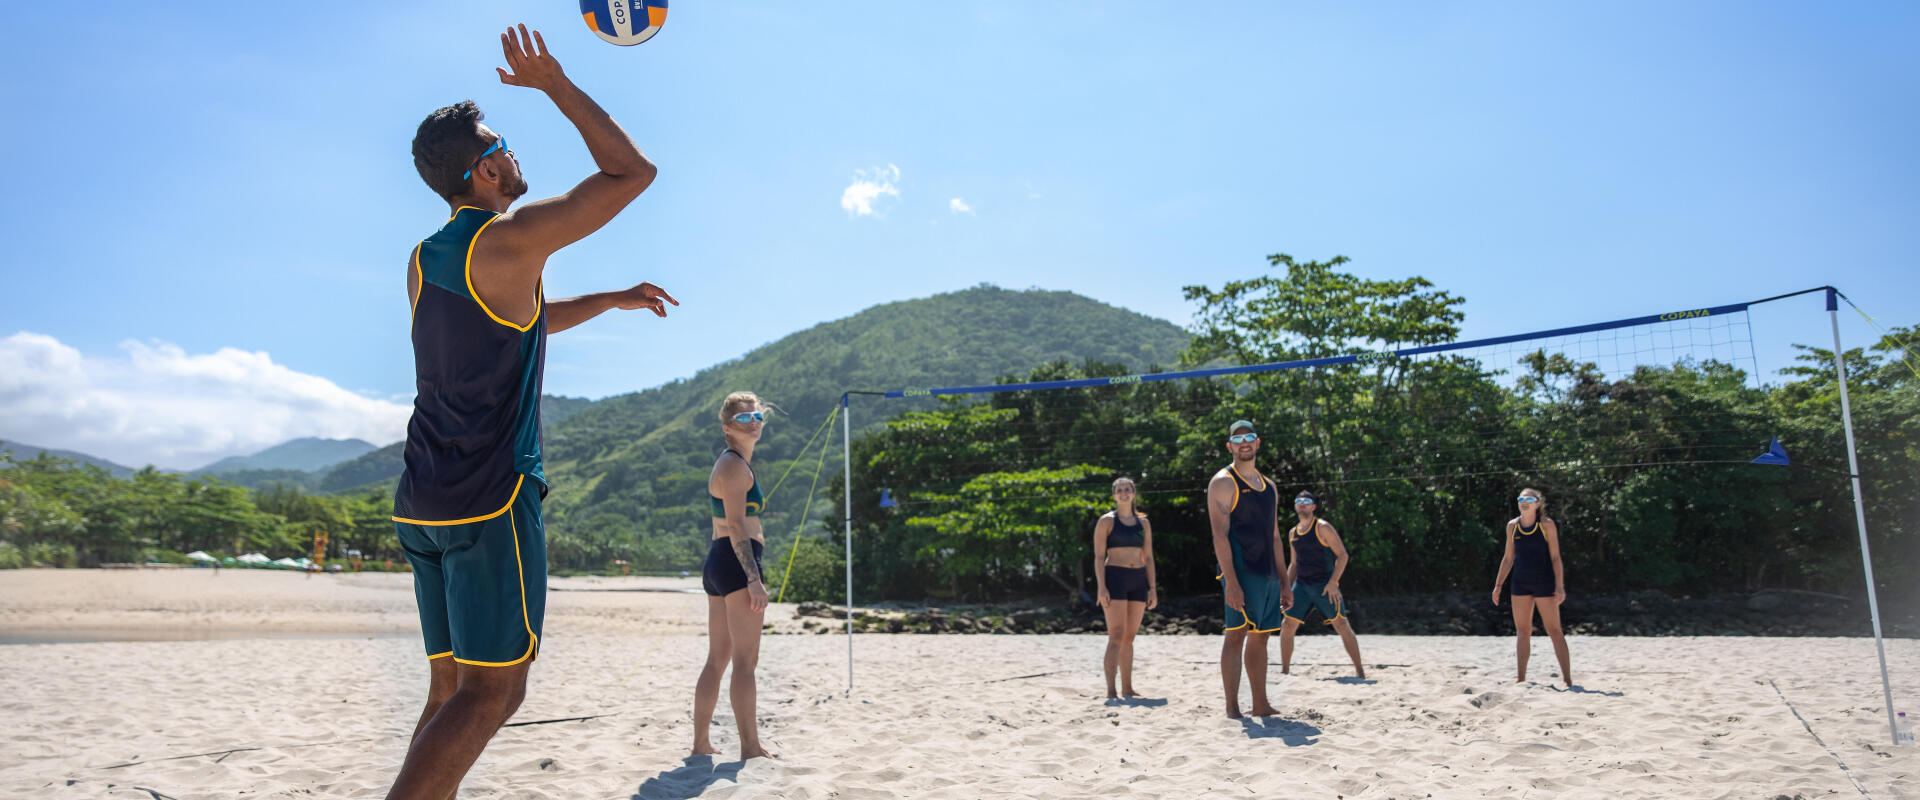 Volleyball and beach volleyball: differences explained